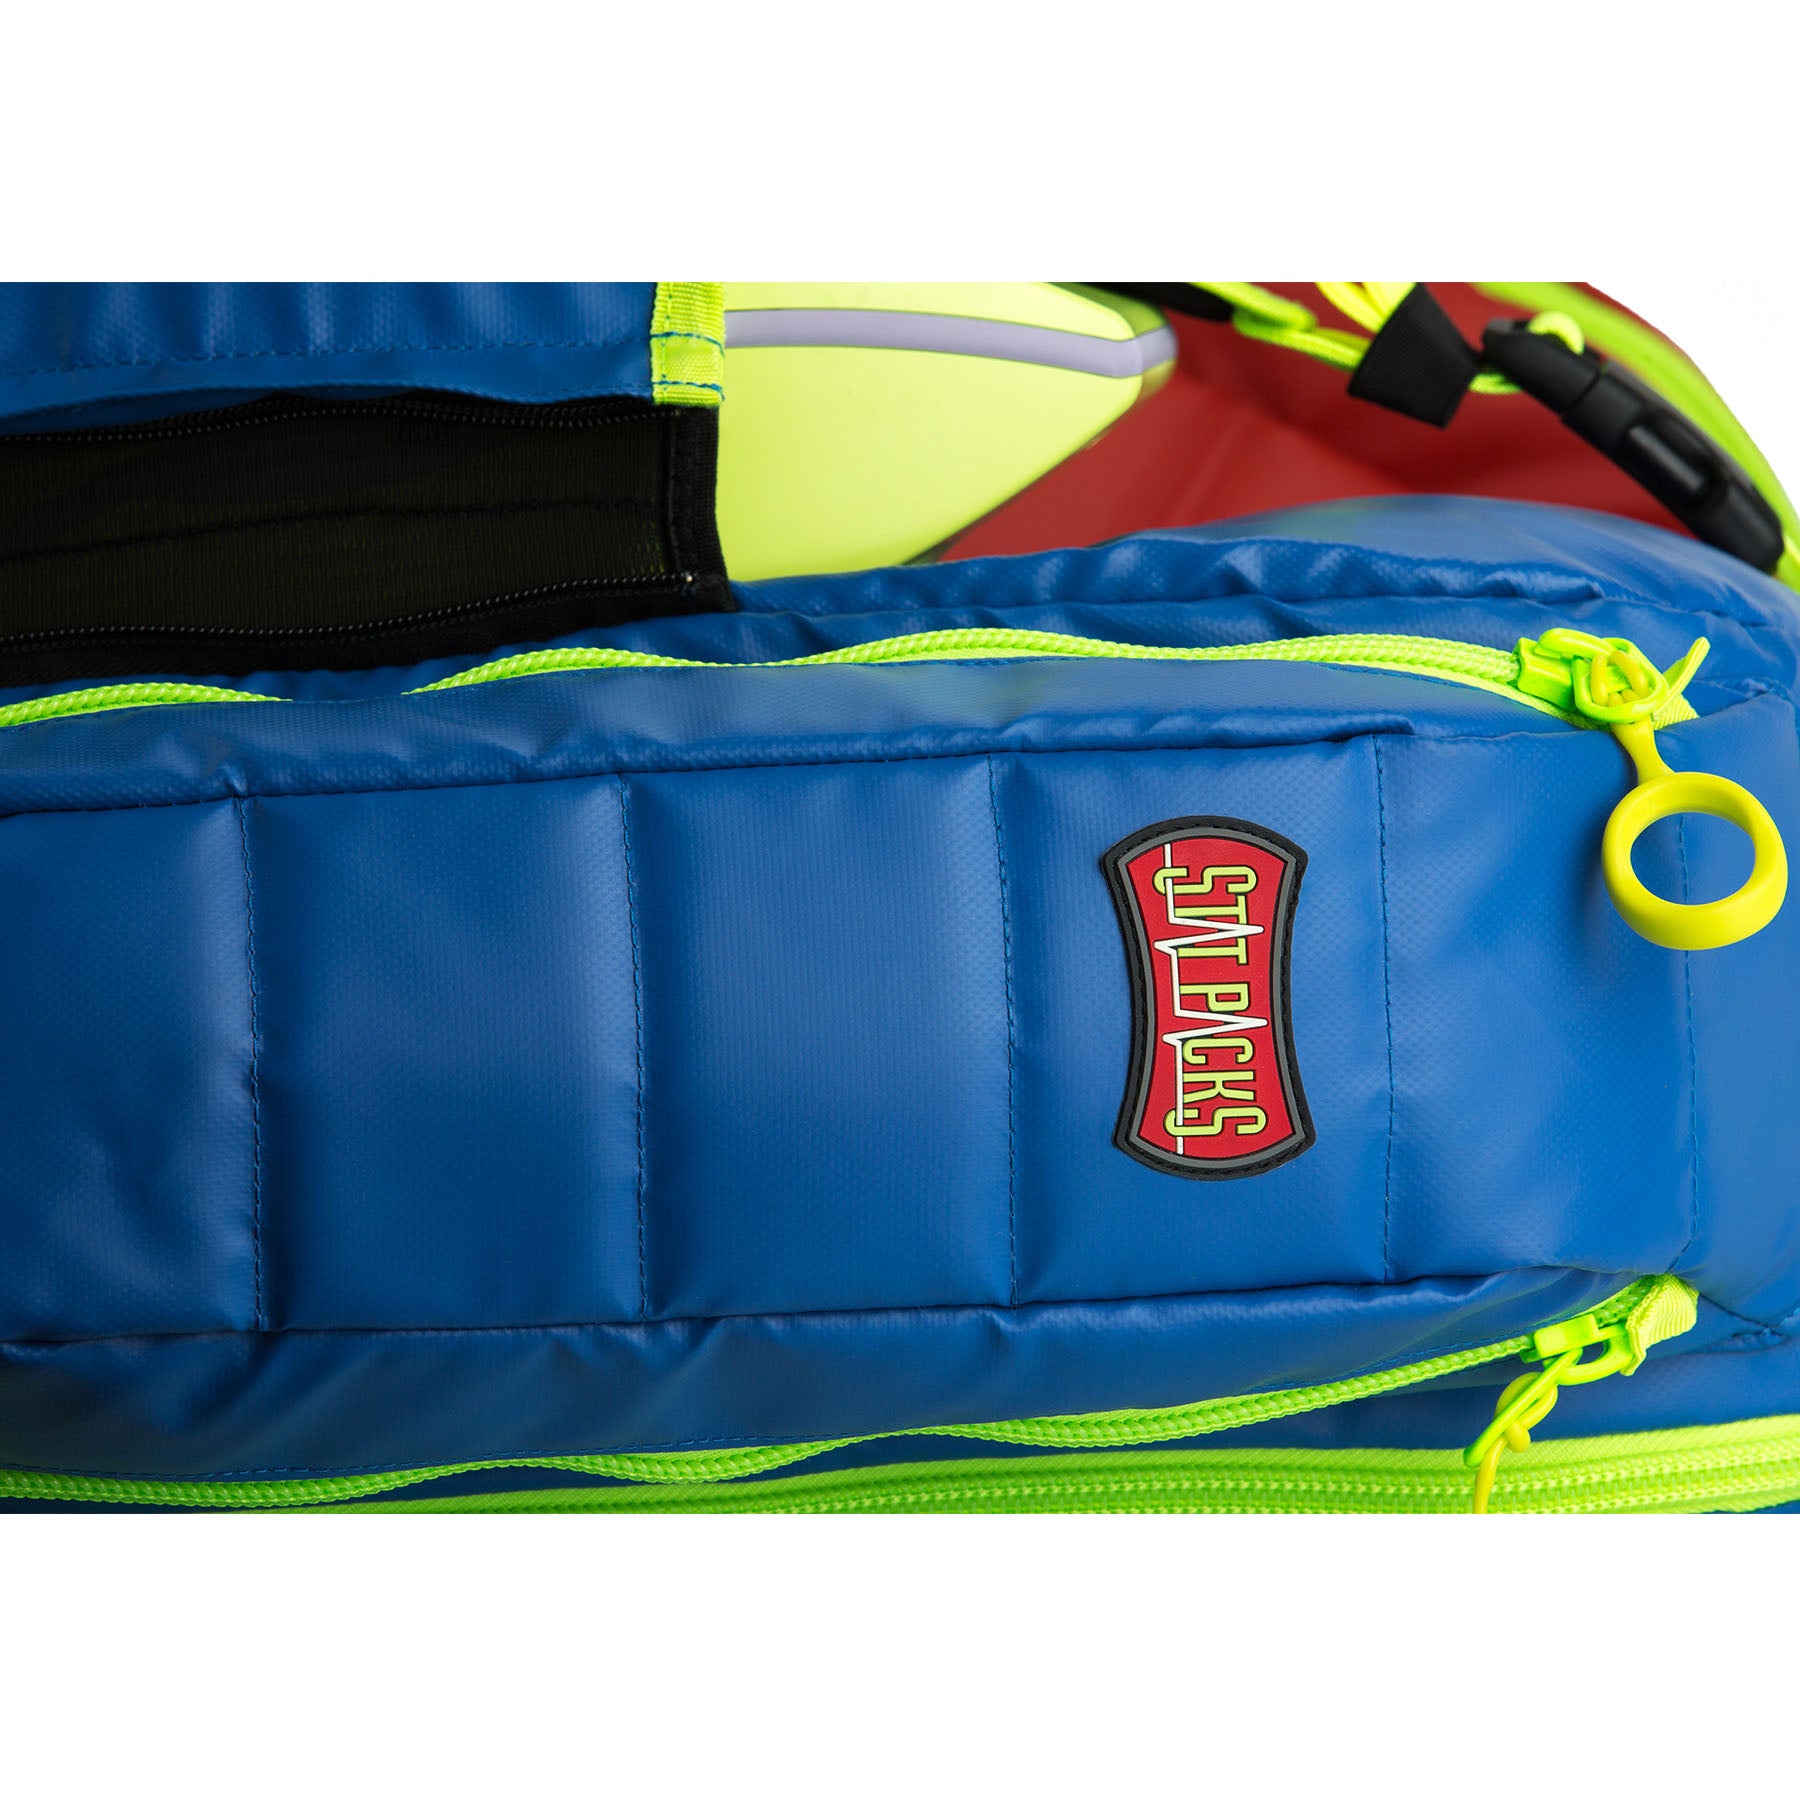 Arihant Bag center - abc - Flying Duck school bag in Rs 950/- Free shipping  and cash on delivery